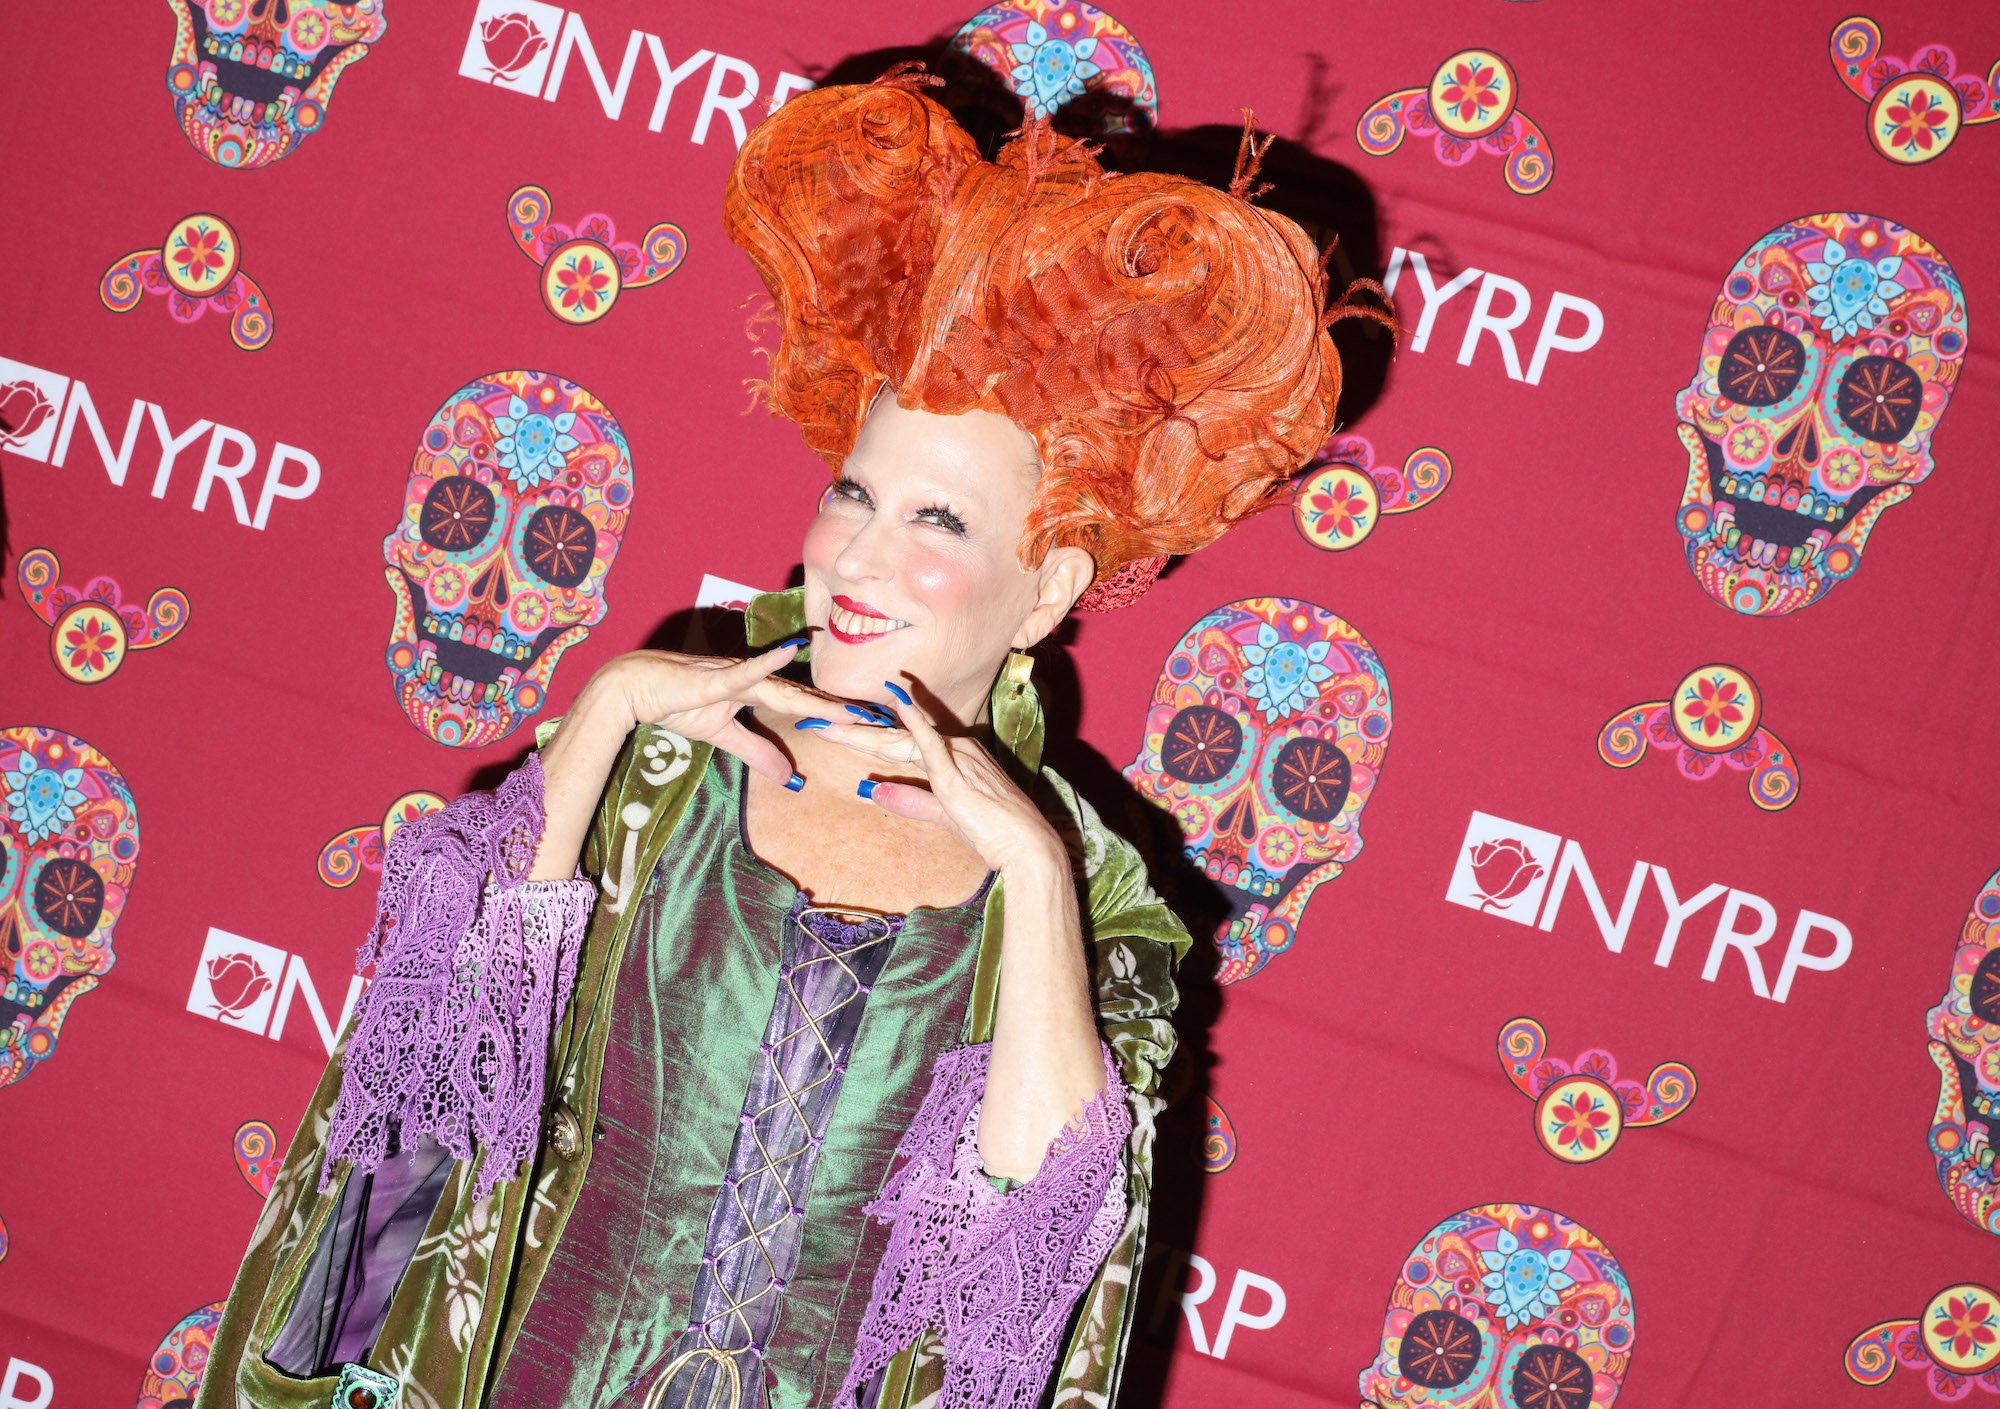 Bette Midler dressed as Winifred Sanderson from 'Hocus Pocus,' on the red carpet at Bette Midler's Annual Hulaween Bash on October 28, 2016.